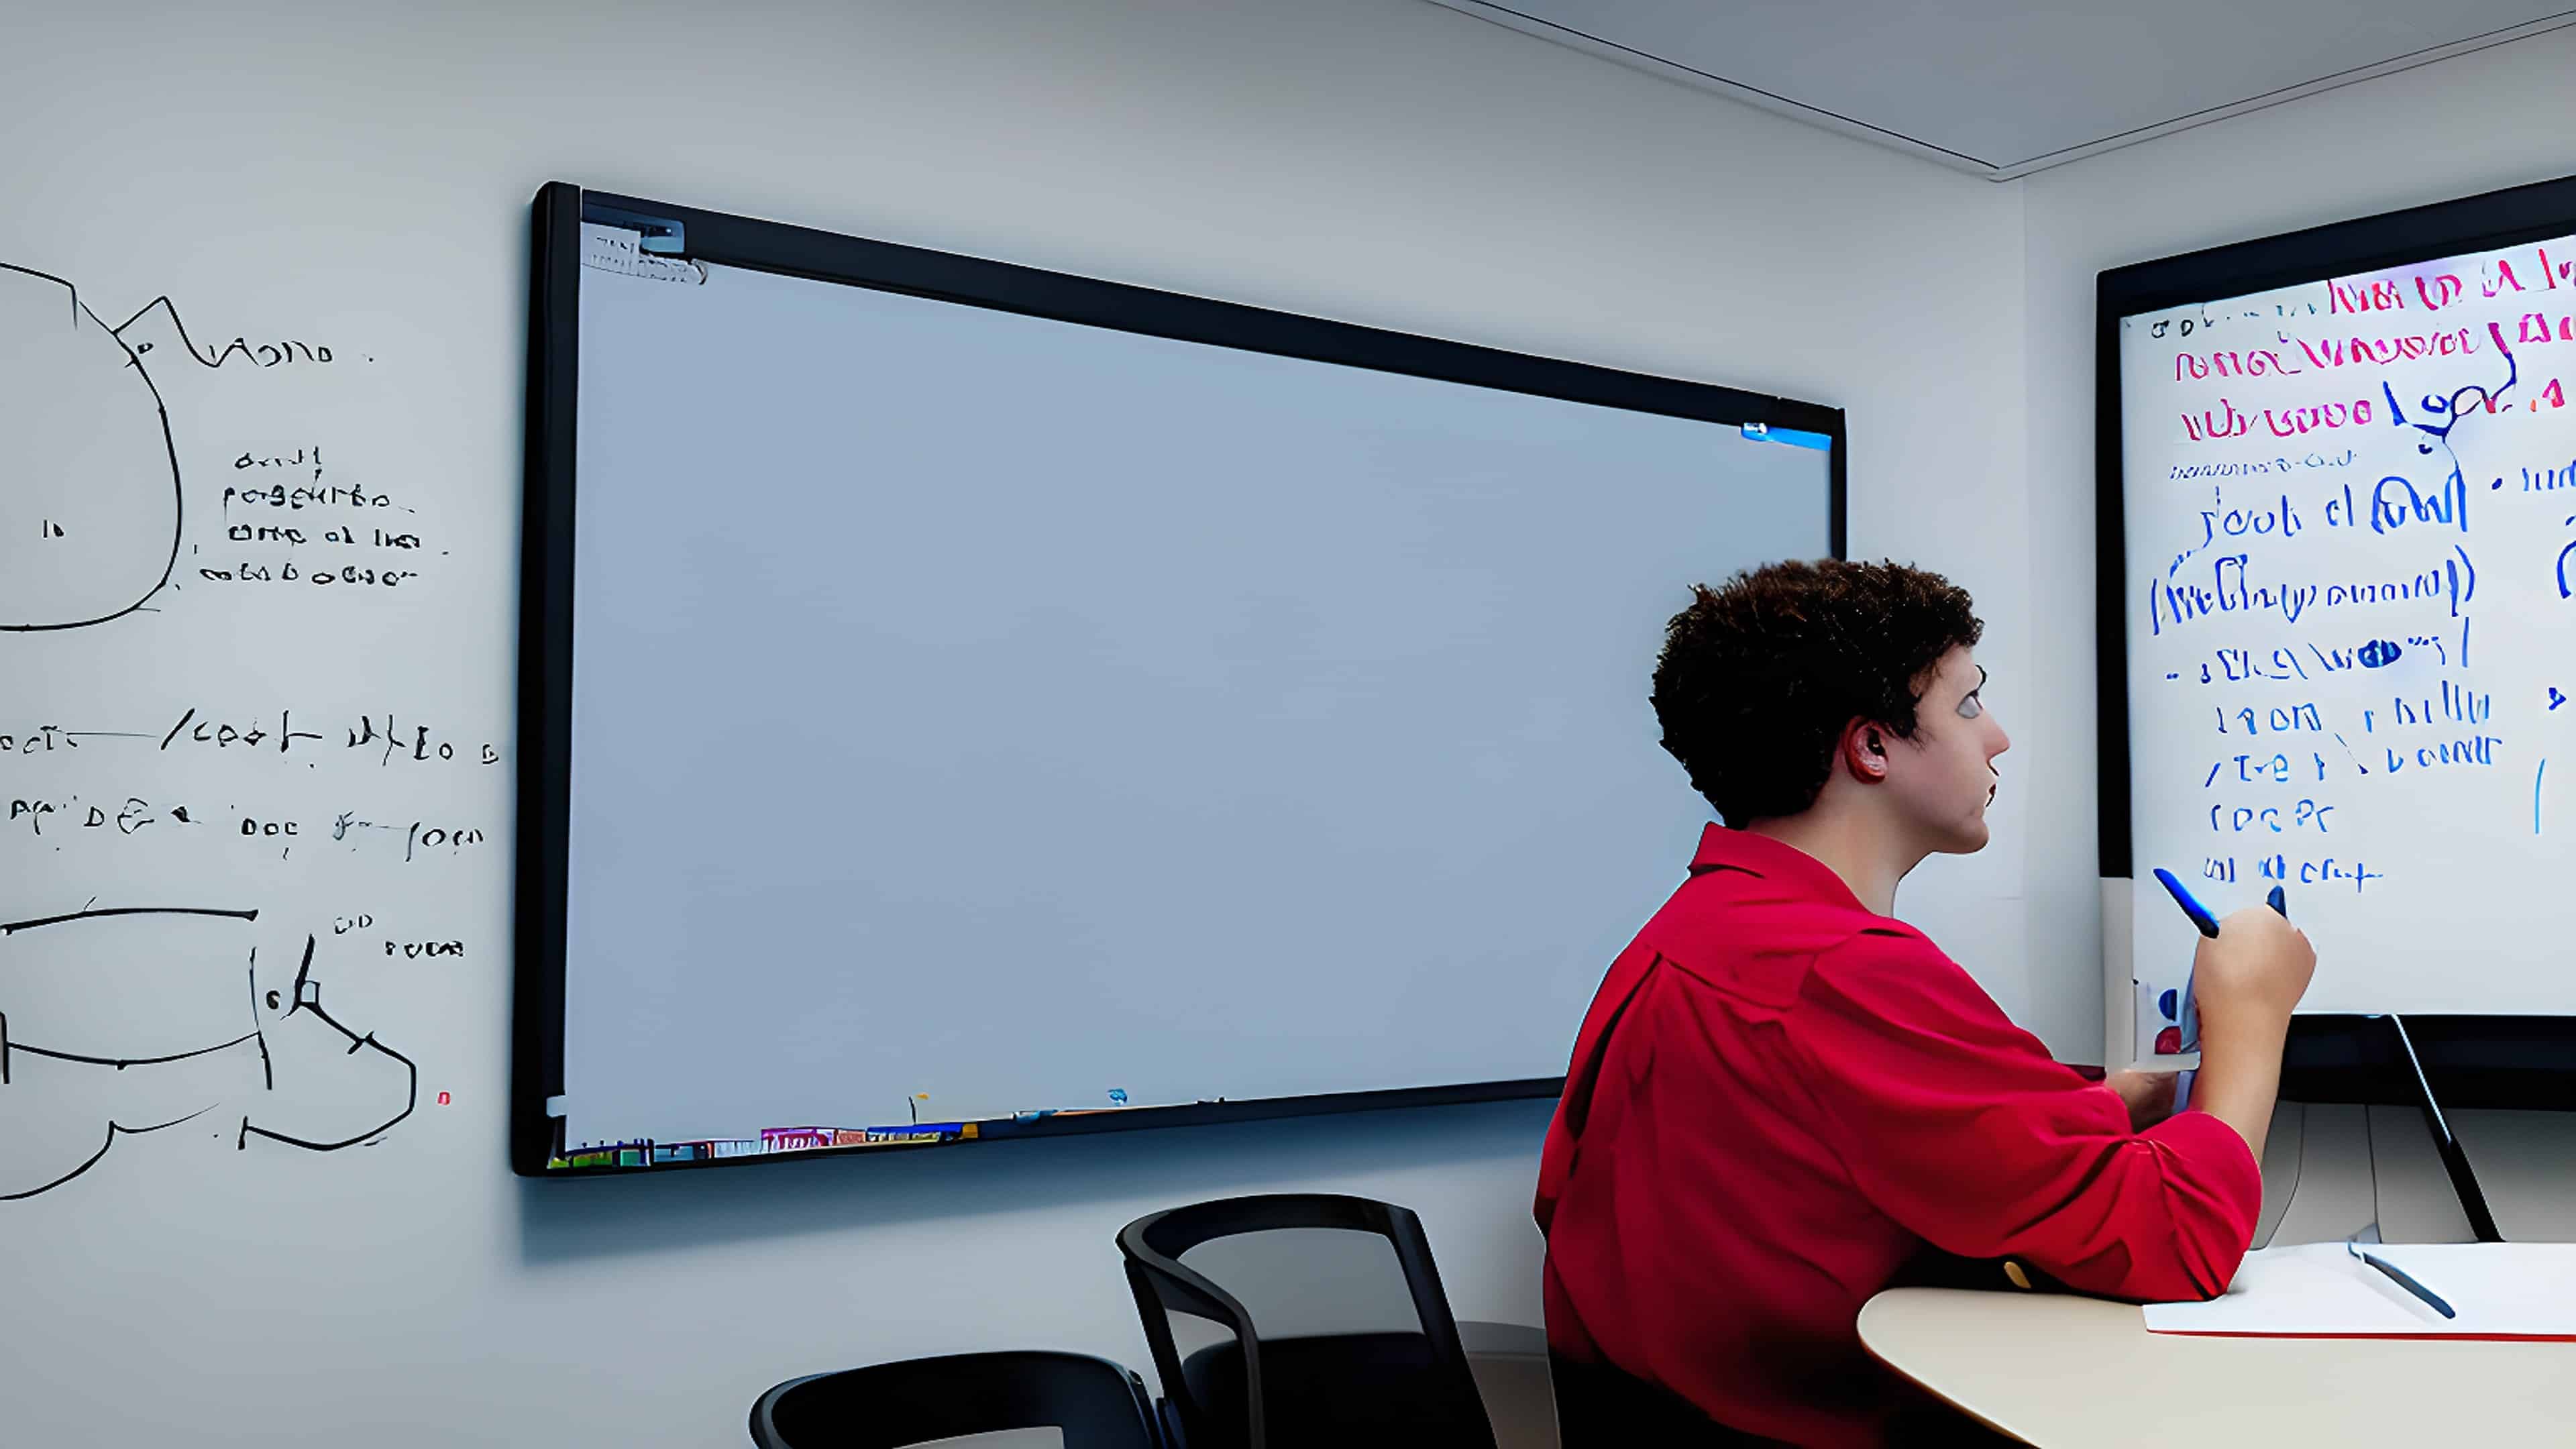 A student is writing on a whiteboard while a computer screen on the wall beside them projects slides from a lecture